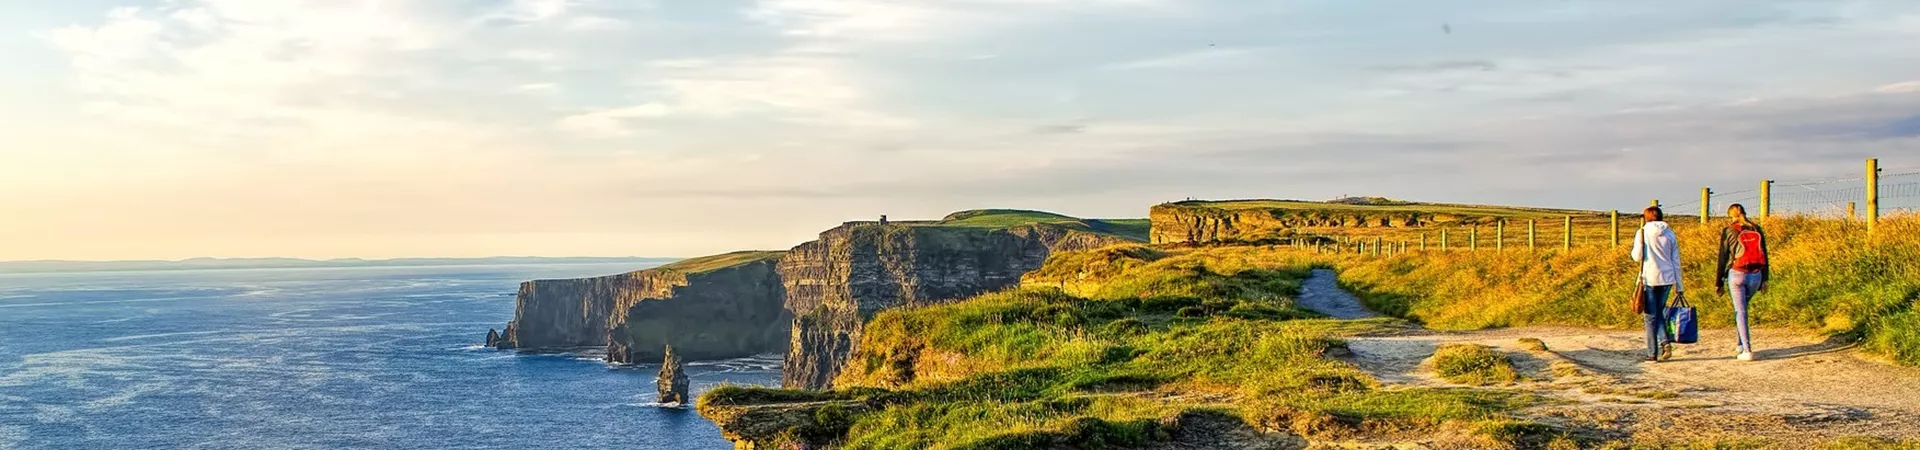 Travellers On Cliffs of Moher in Ireland